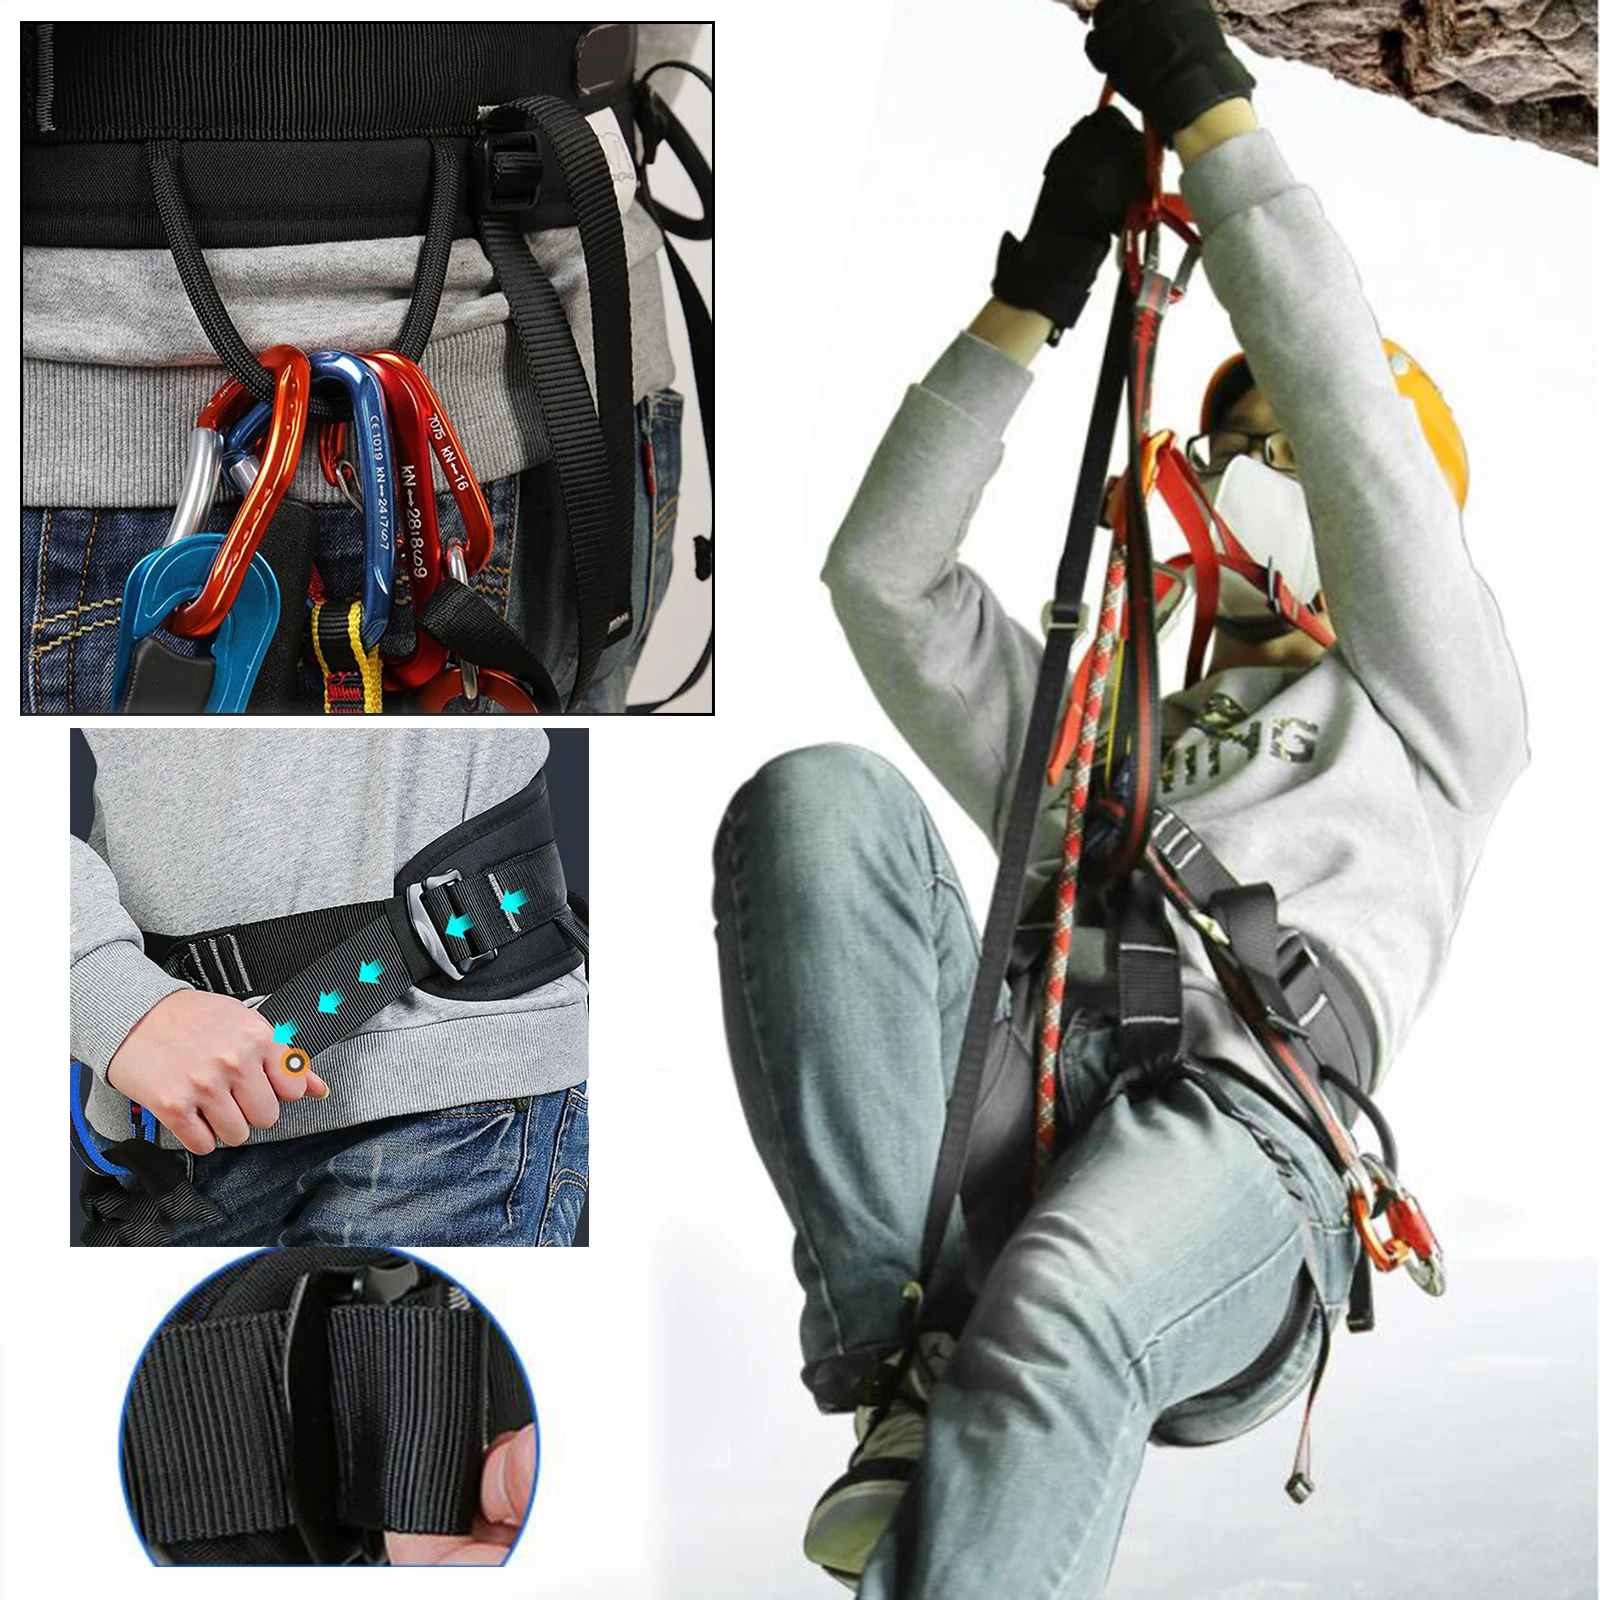 Details about   Protection Harness Seat Safety PVC Rescue Rappelling Protective Caving 